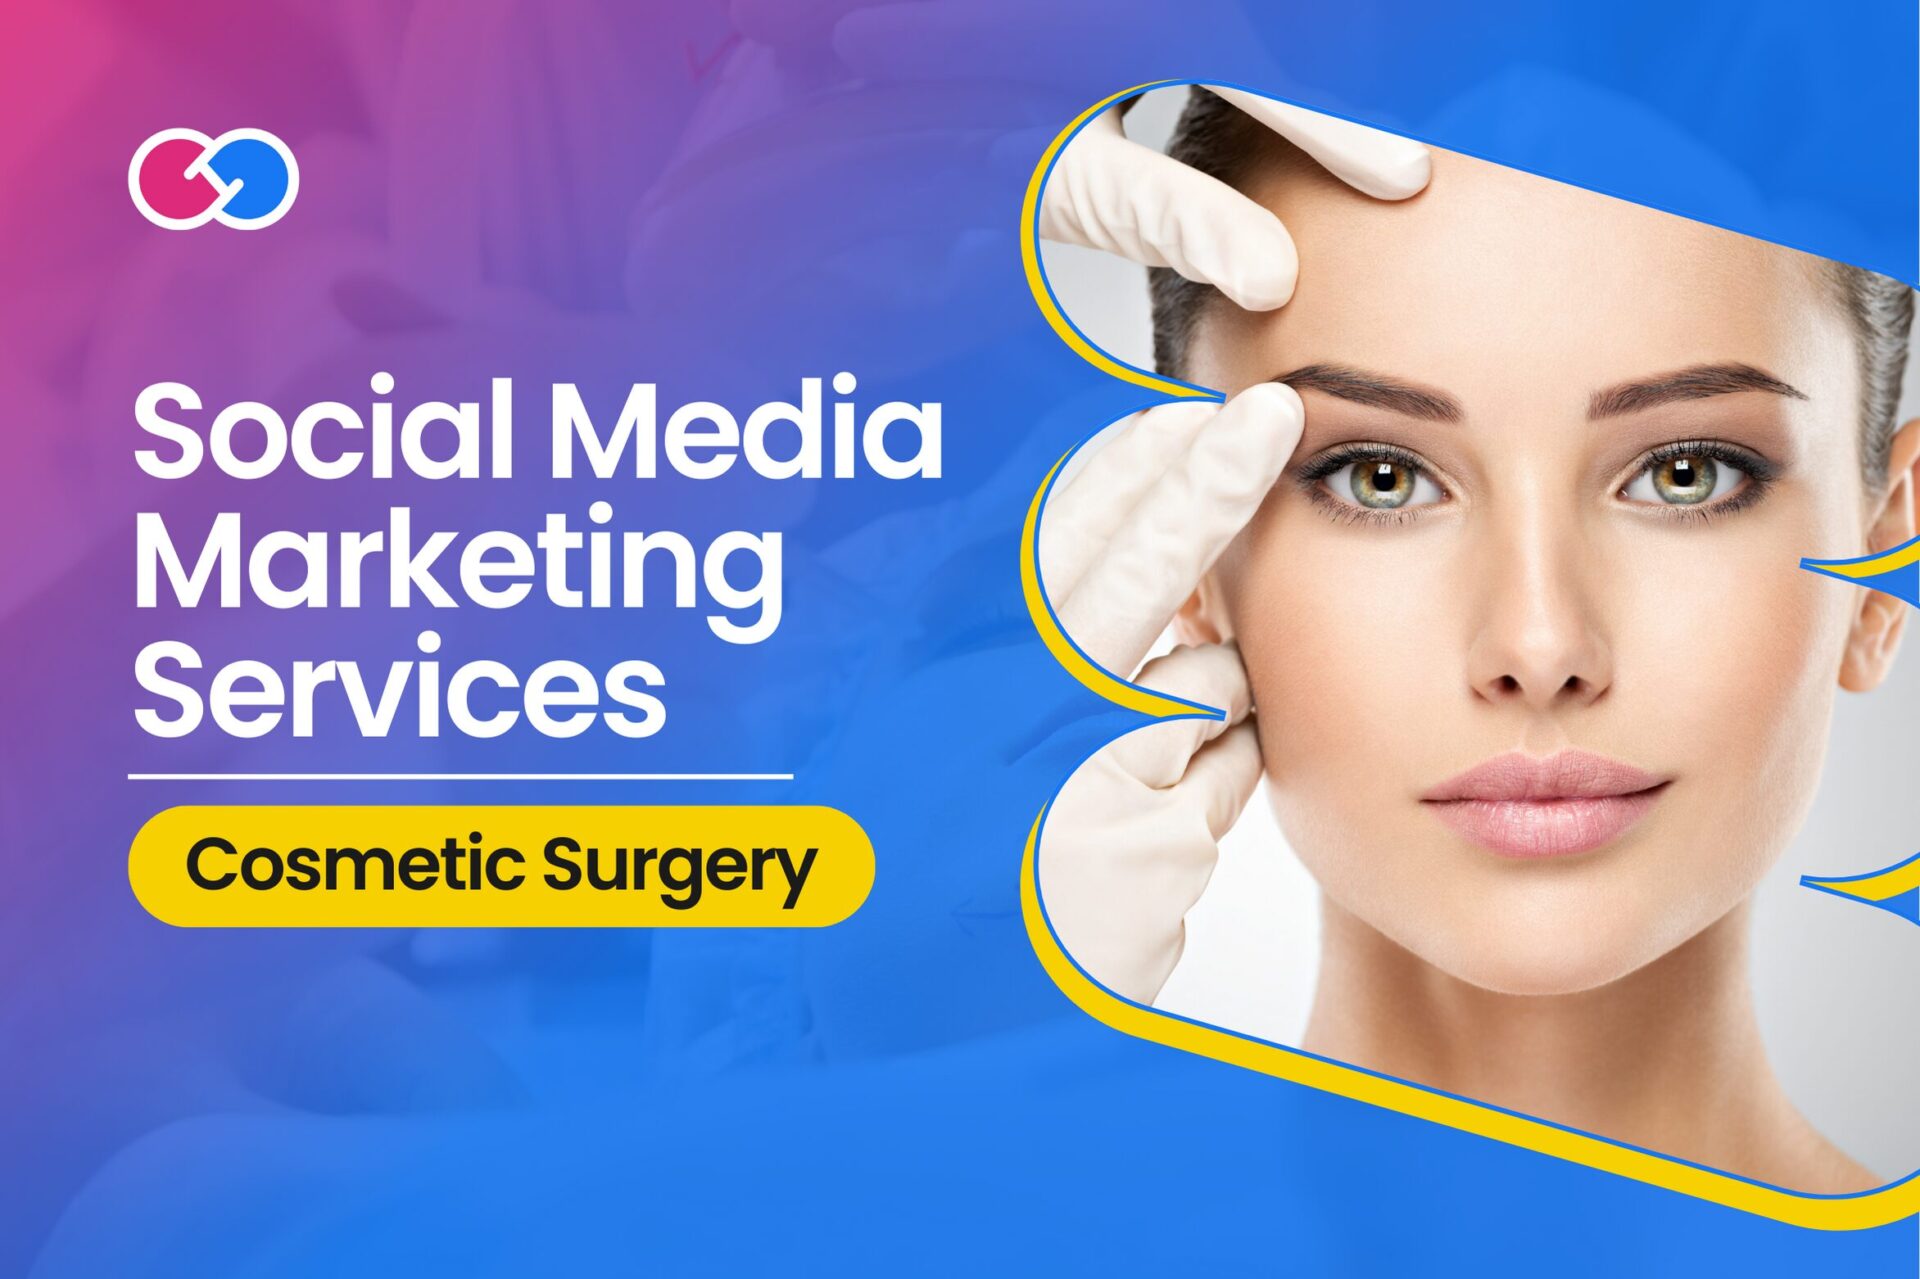 Social Media Marketing Services For Cosmetic Surgery